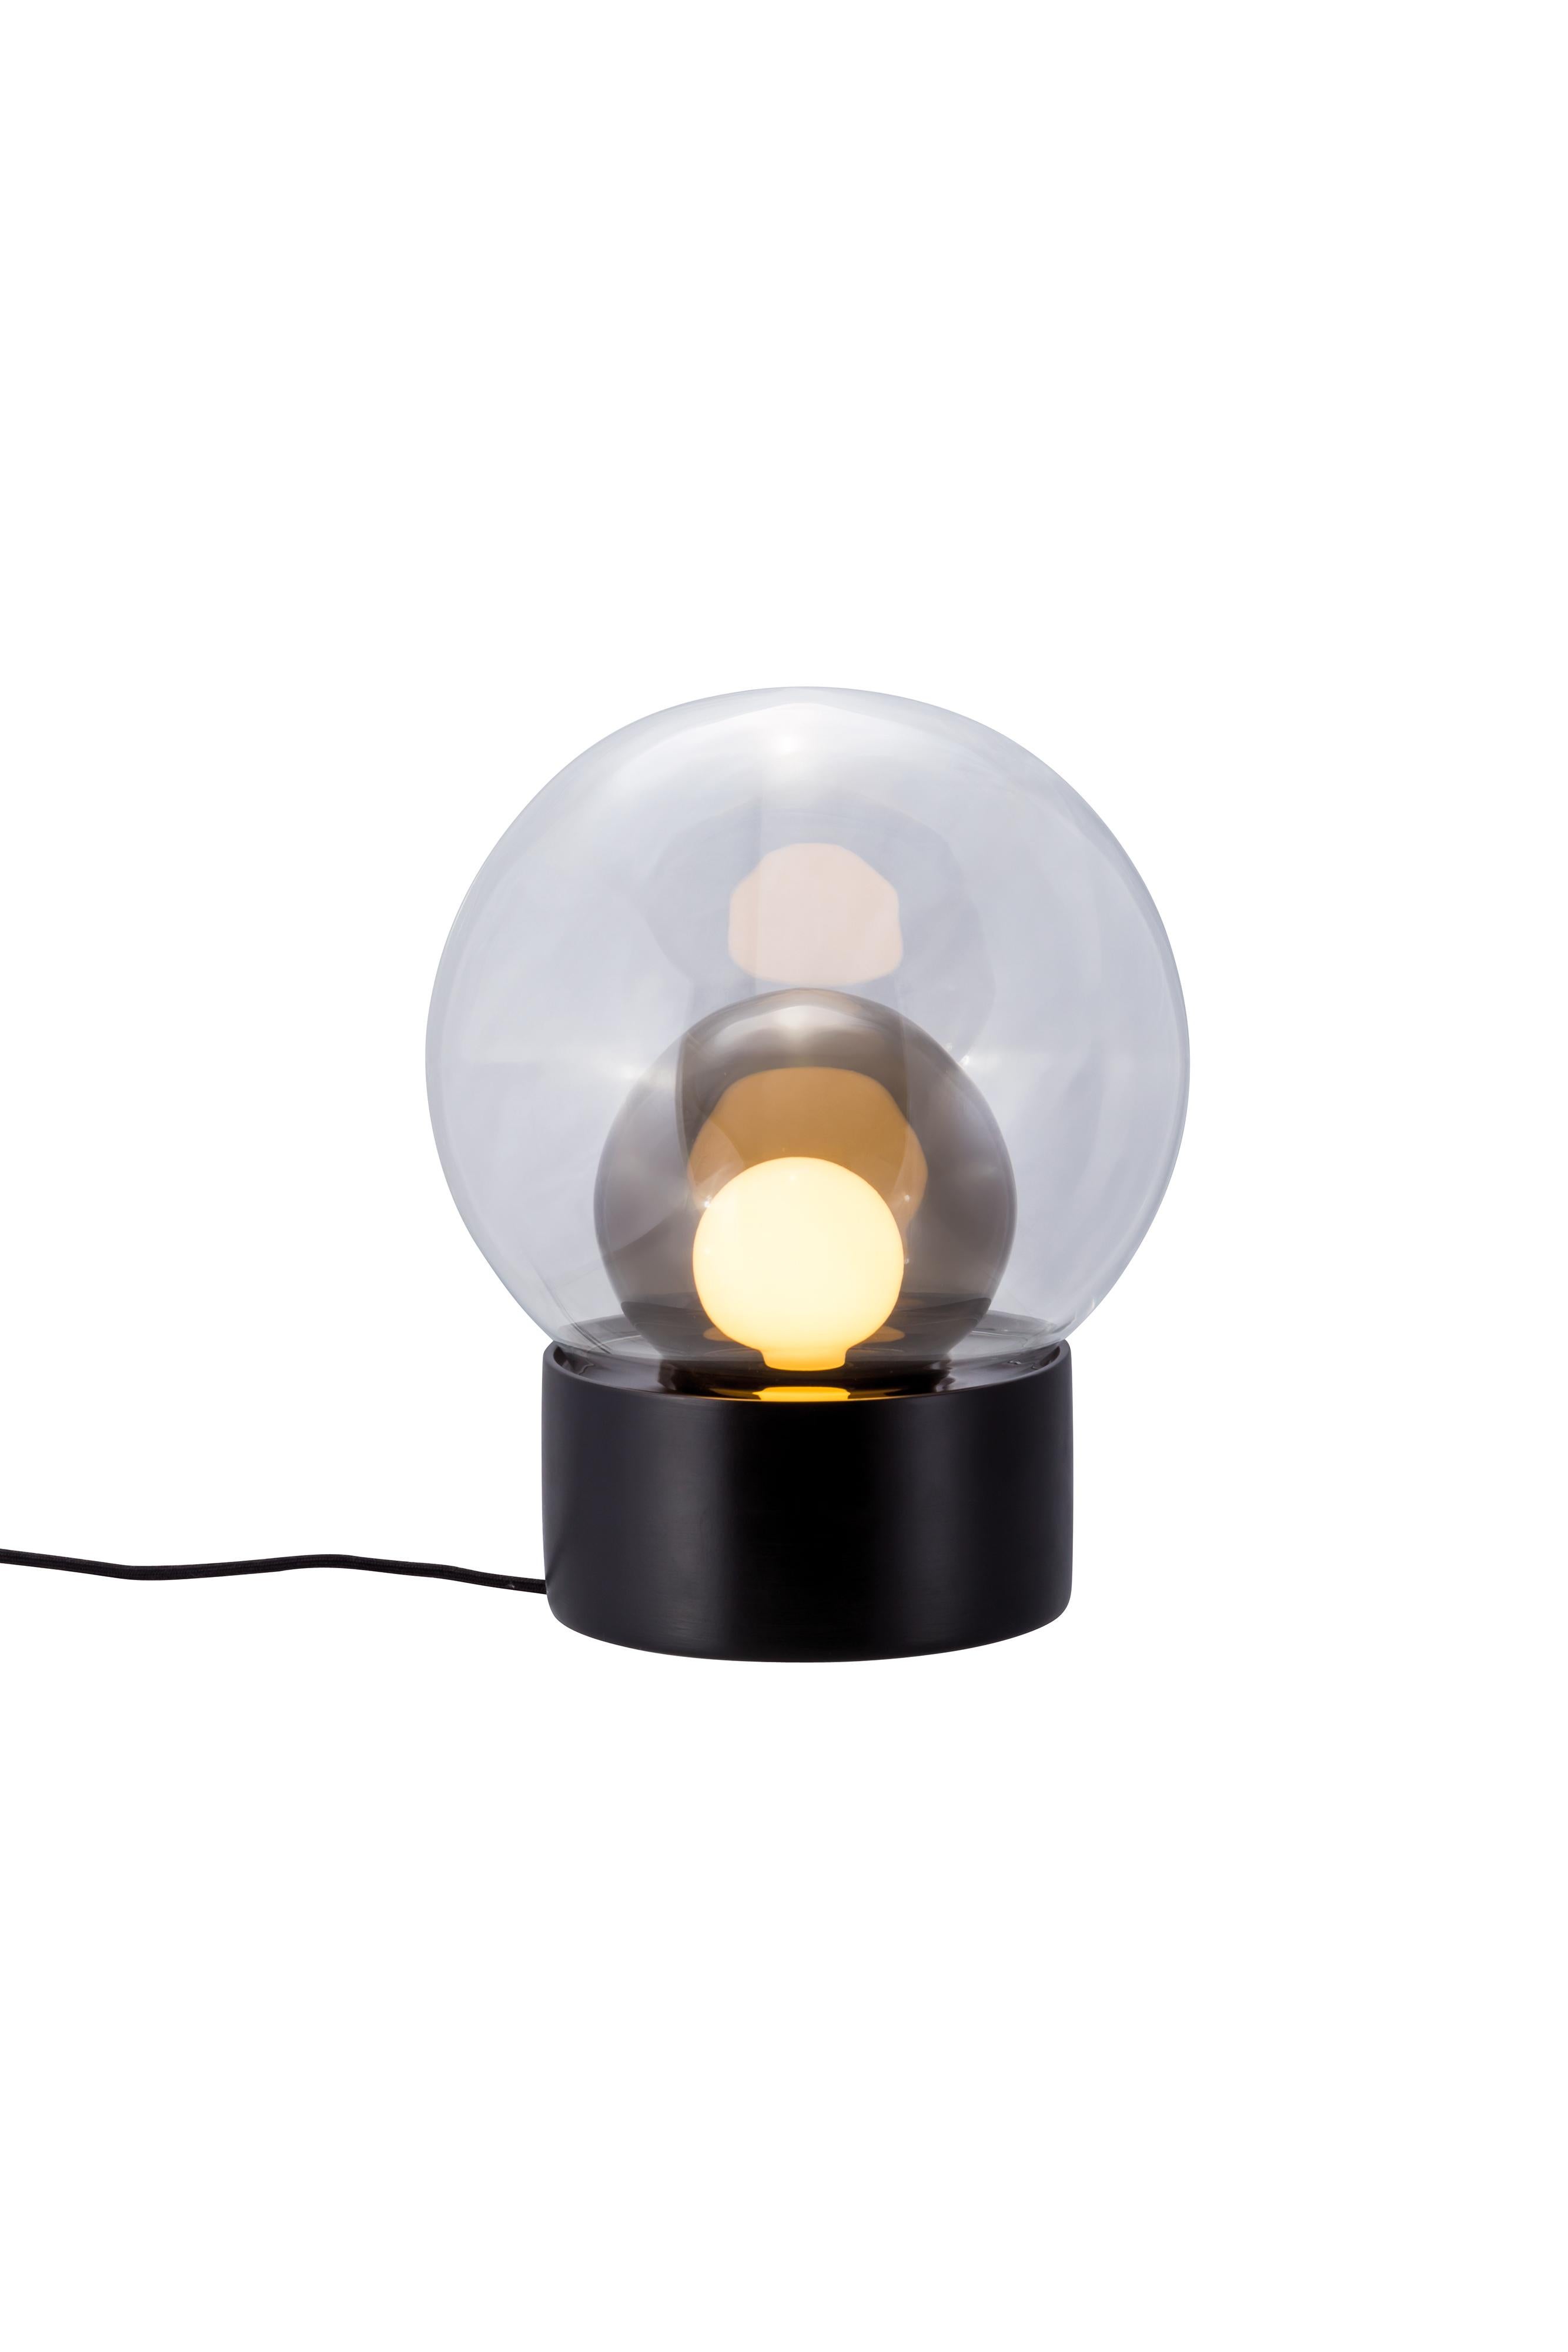 Boule Small Transparent Smoky Grey Black Table Lamp by Pulpo
Dimensions: D29 x H35.5 cm
Materials: ceramic, handblown glass, coloured, textile.

Also available in different finishes: transparent  opal white black,  transparent  smoky grey black,